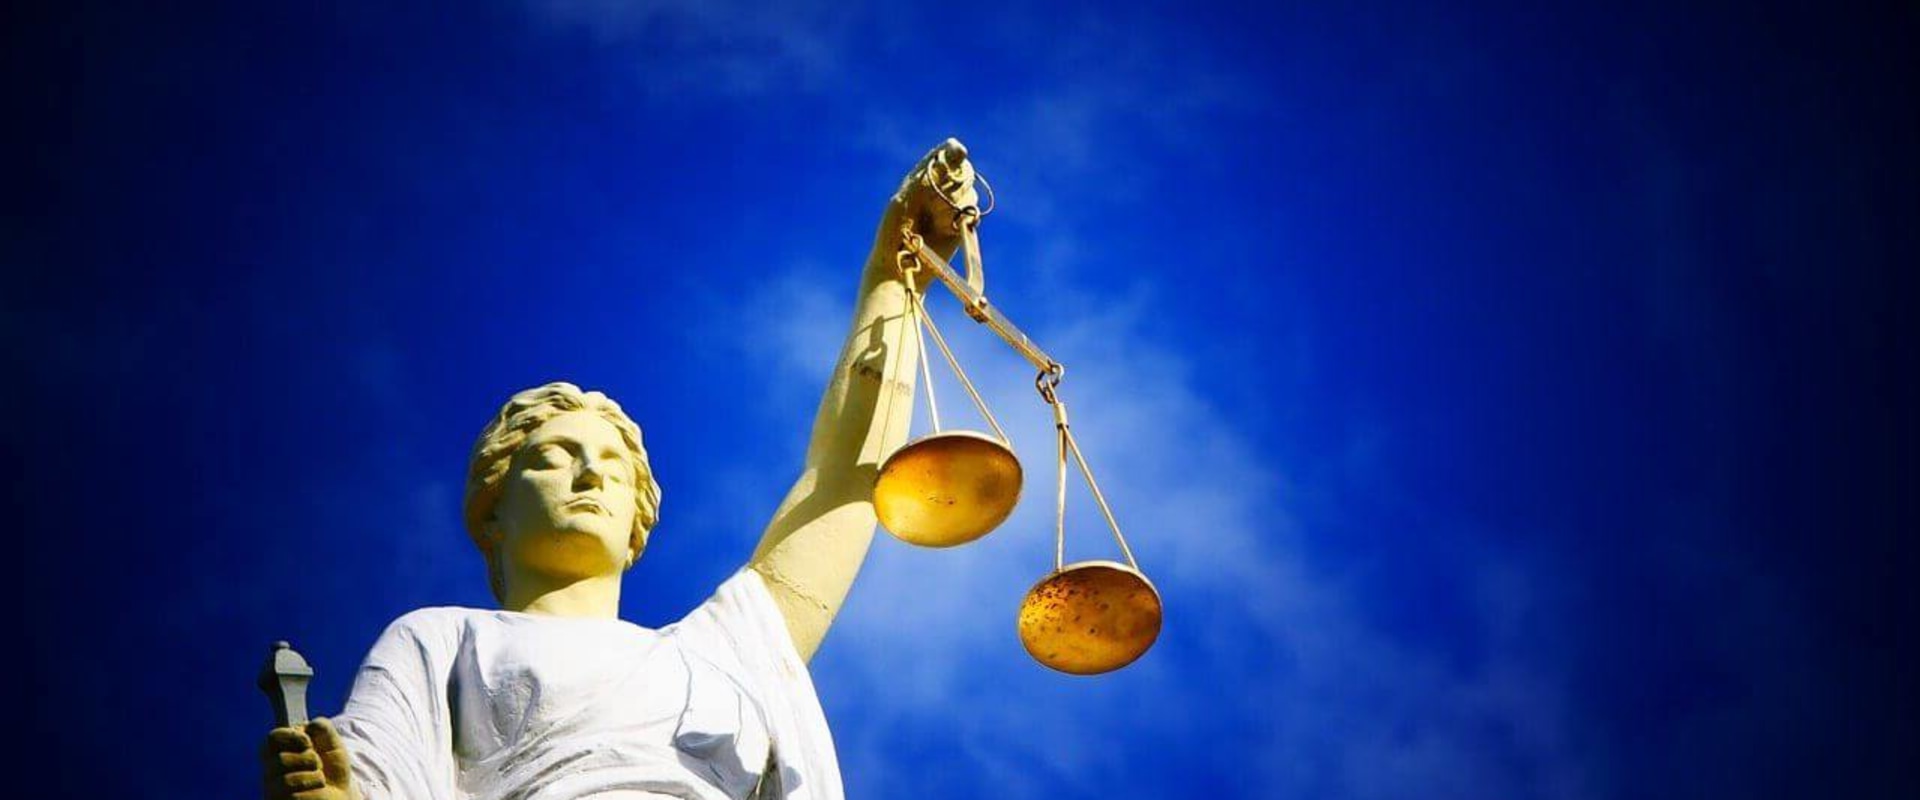 How can we use moral principles to promote justice and fairness?